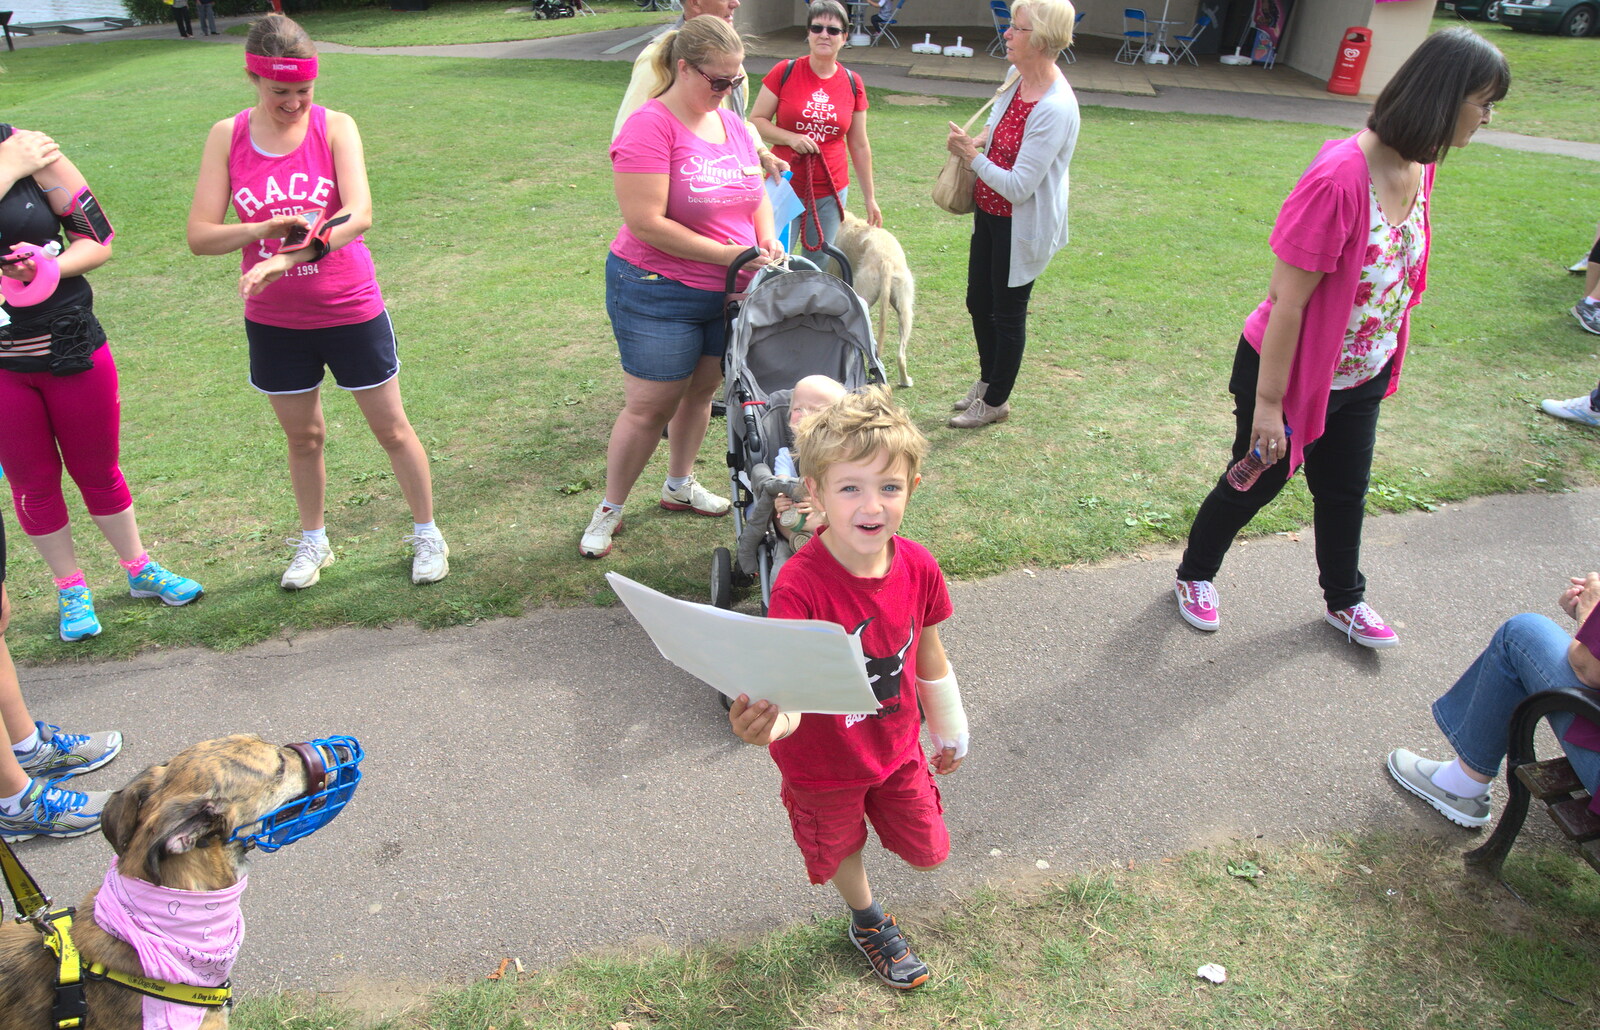 Fred's got a sheet of stickers from A Race For Life, The Park, Diss, Norfolk - 16th August 2015